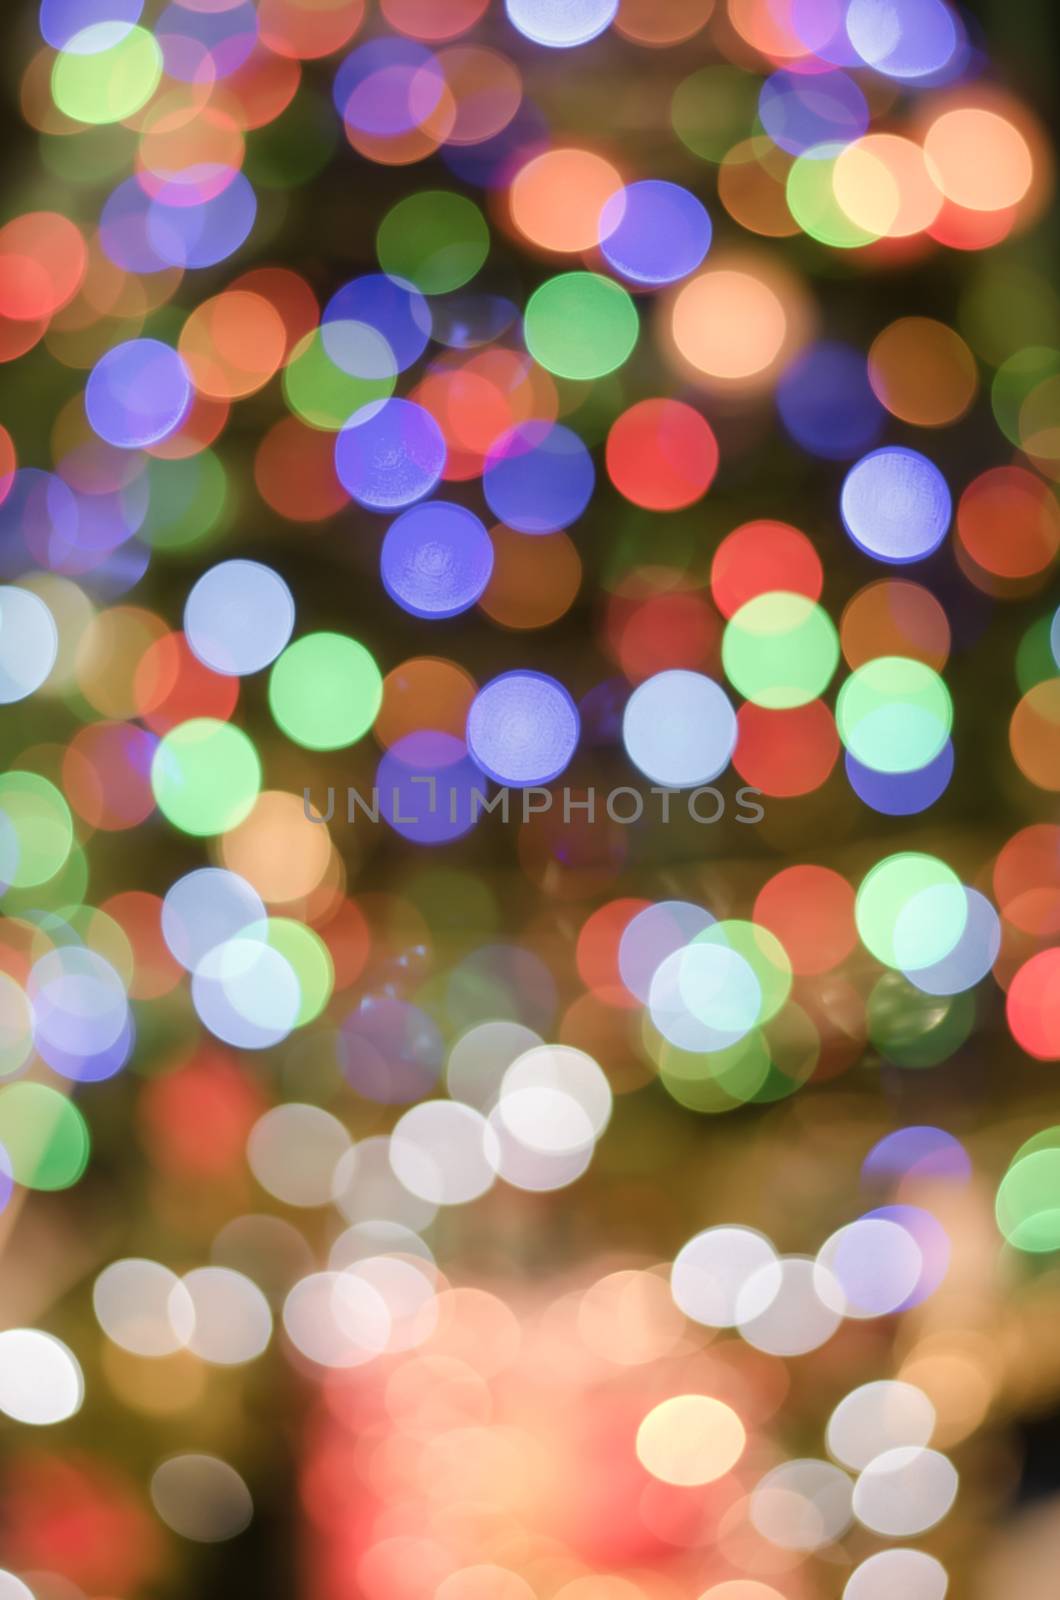 Colorful background with defocused lights  by photobyphotoboy